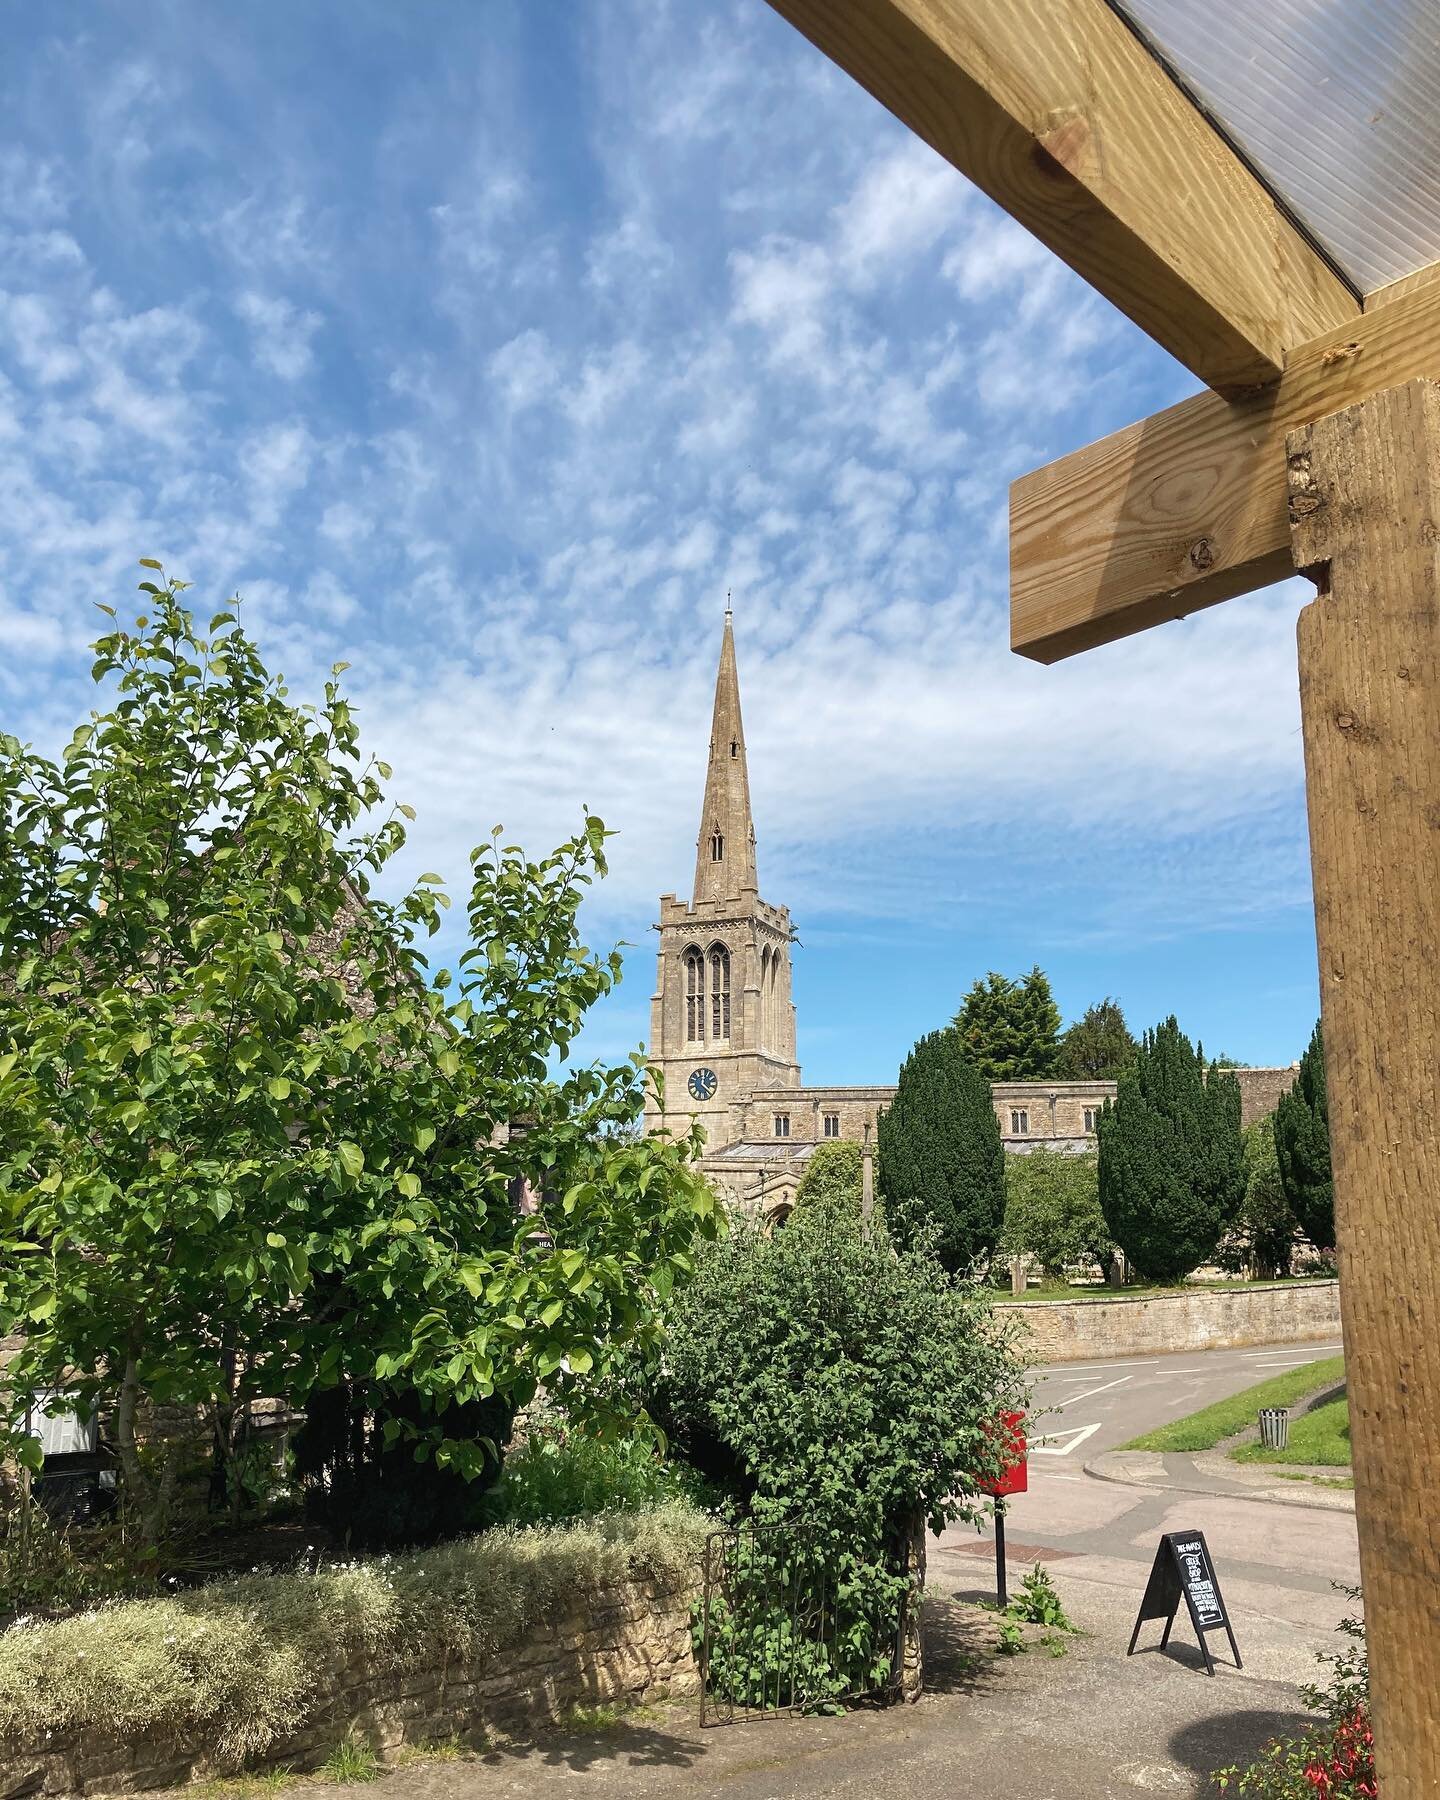 It&rsquo;s a fabulous Friday! We hope everyone gets to enjoy the sunshine ☀️ 💛 
&bull;
&bull;
&bull;
&bull;
#bulwick #englishchurch #historicengland #villagelife #countryliving #countrylife #rurallife #stamforduk #northants